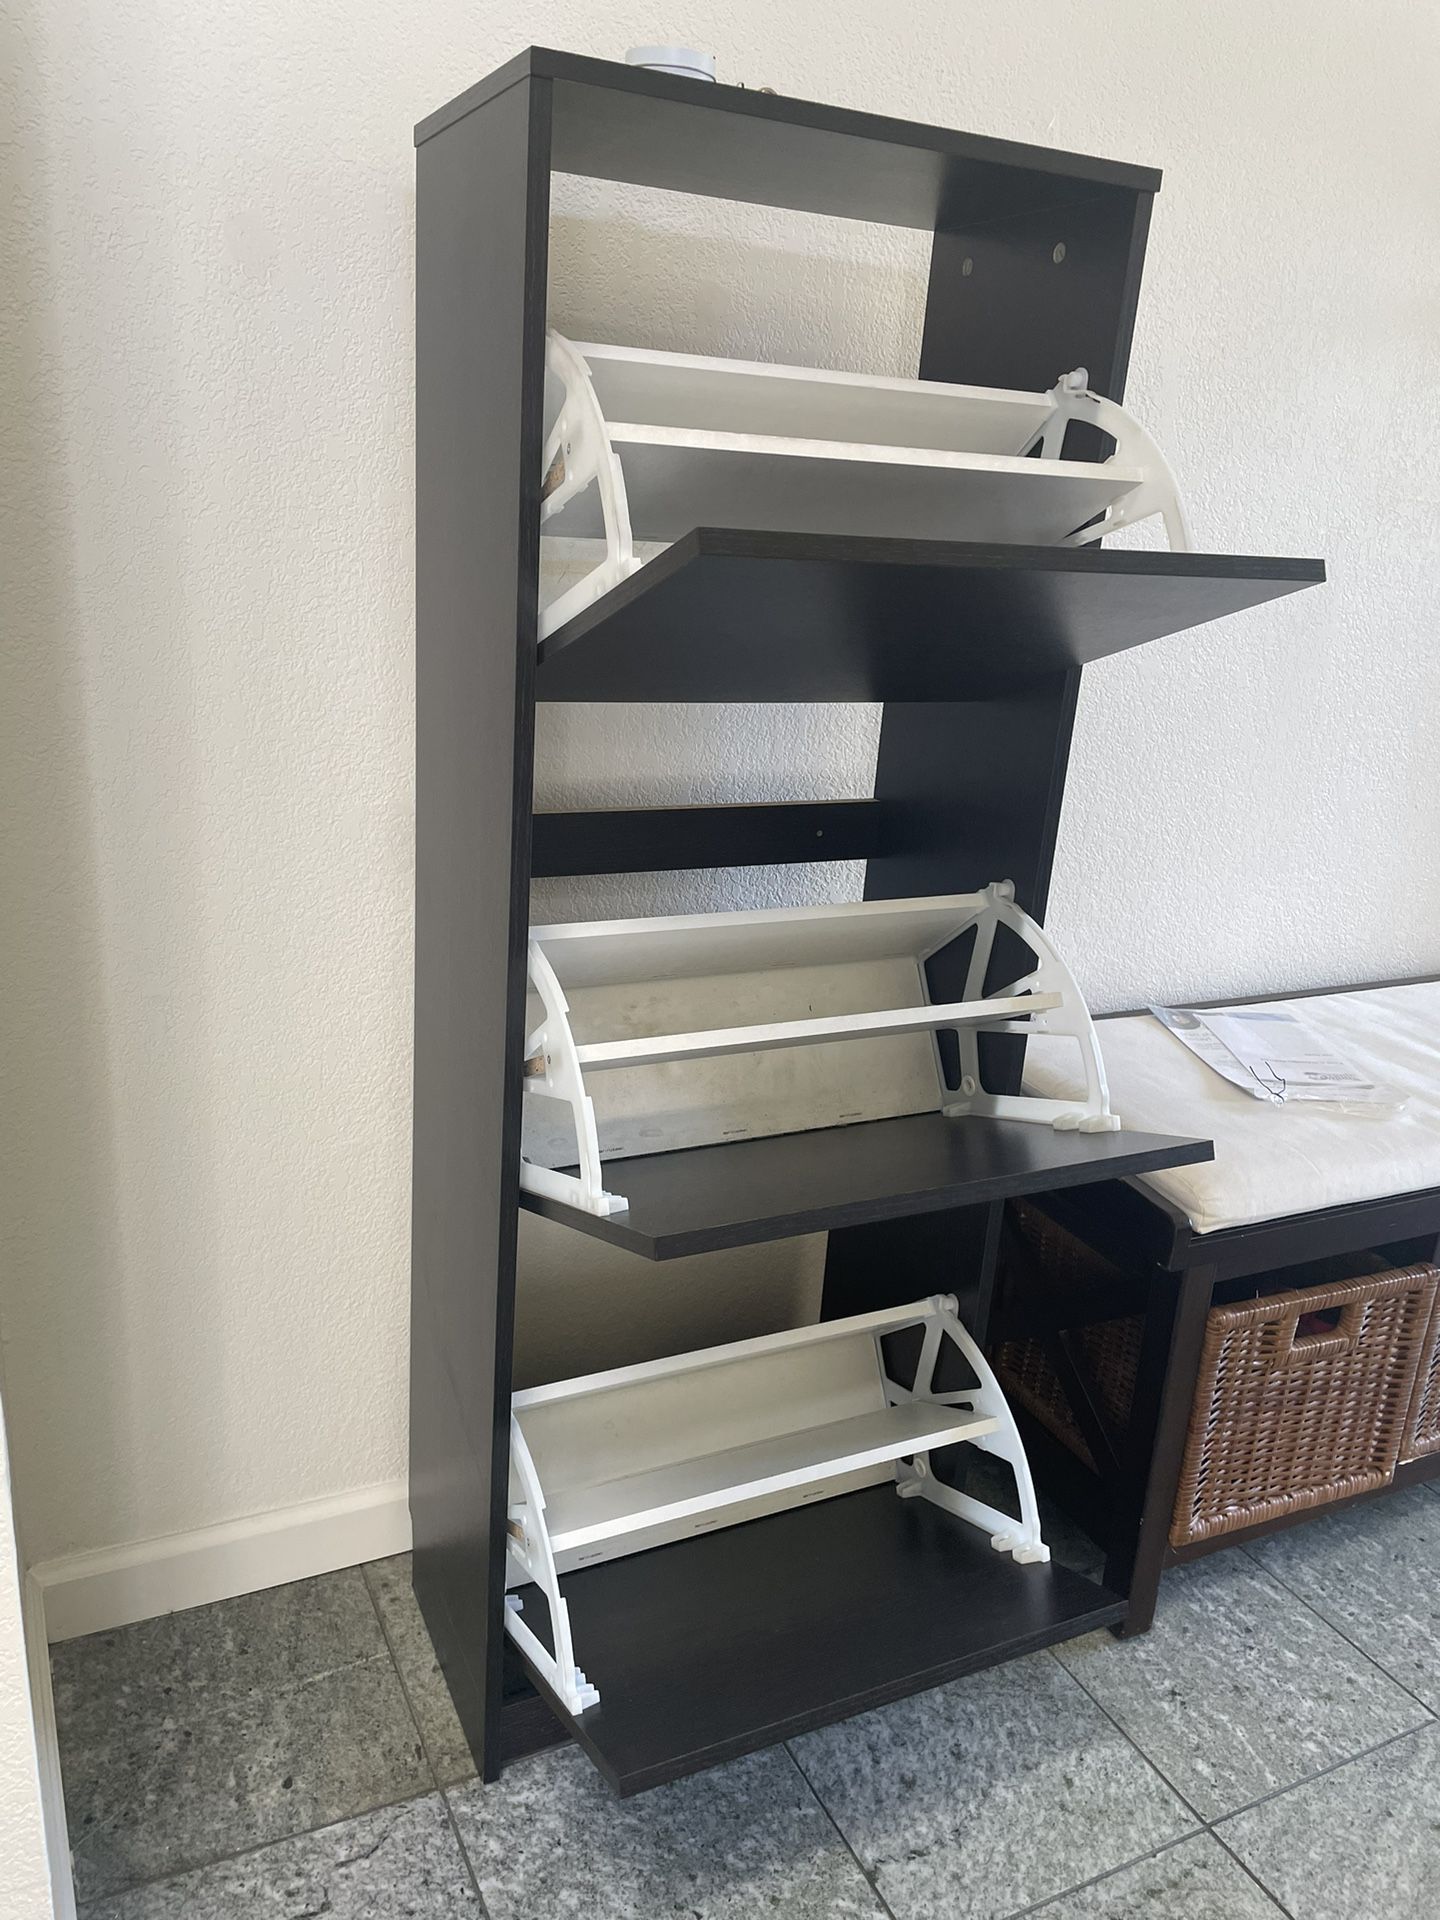 PENDING - Two IKEA shoe cabinets with 3 shelves